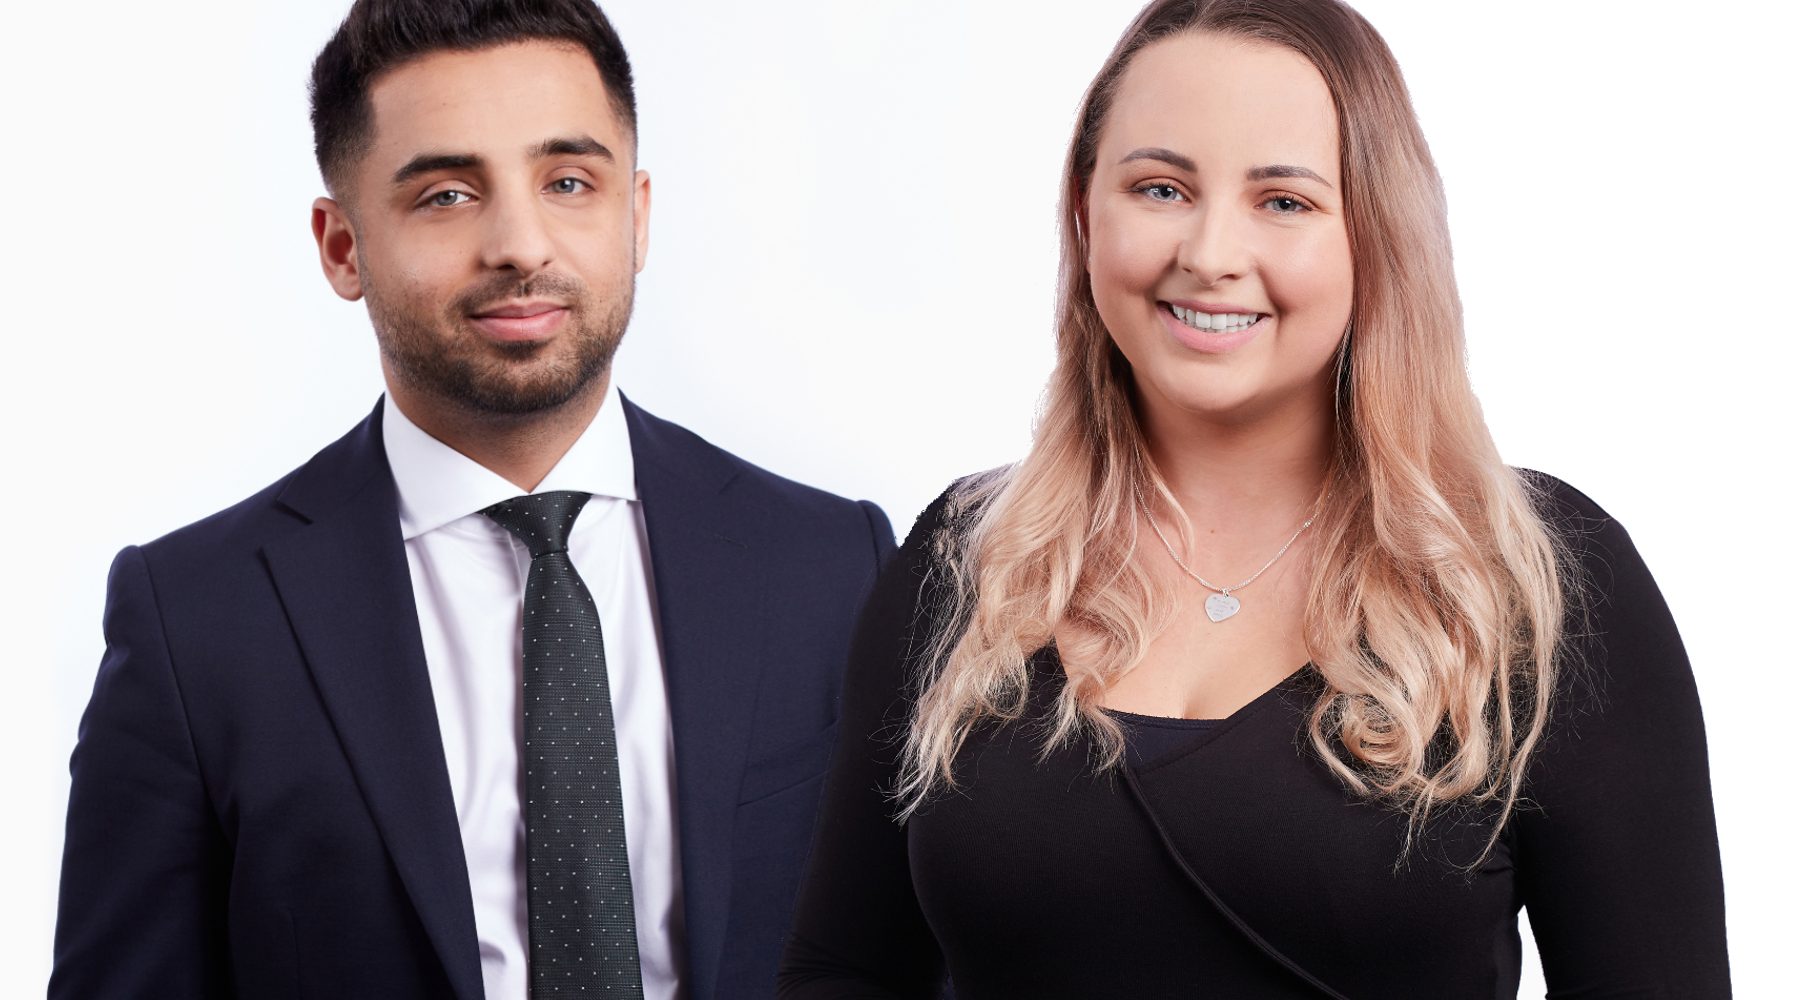 ﻿Morrish Solicitors LLP announces newly qualified solicitors.